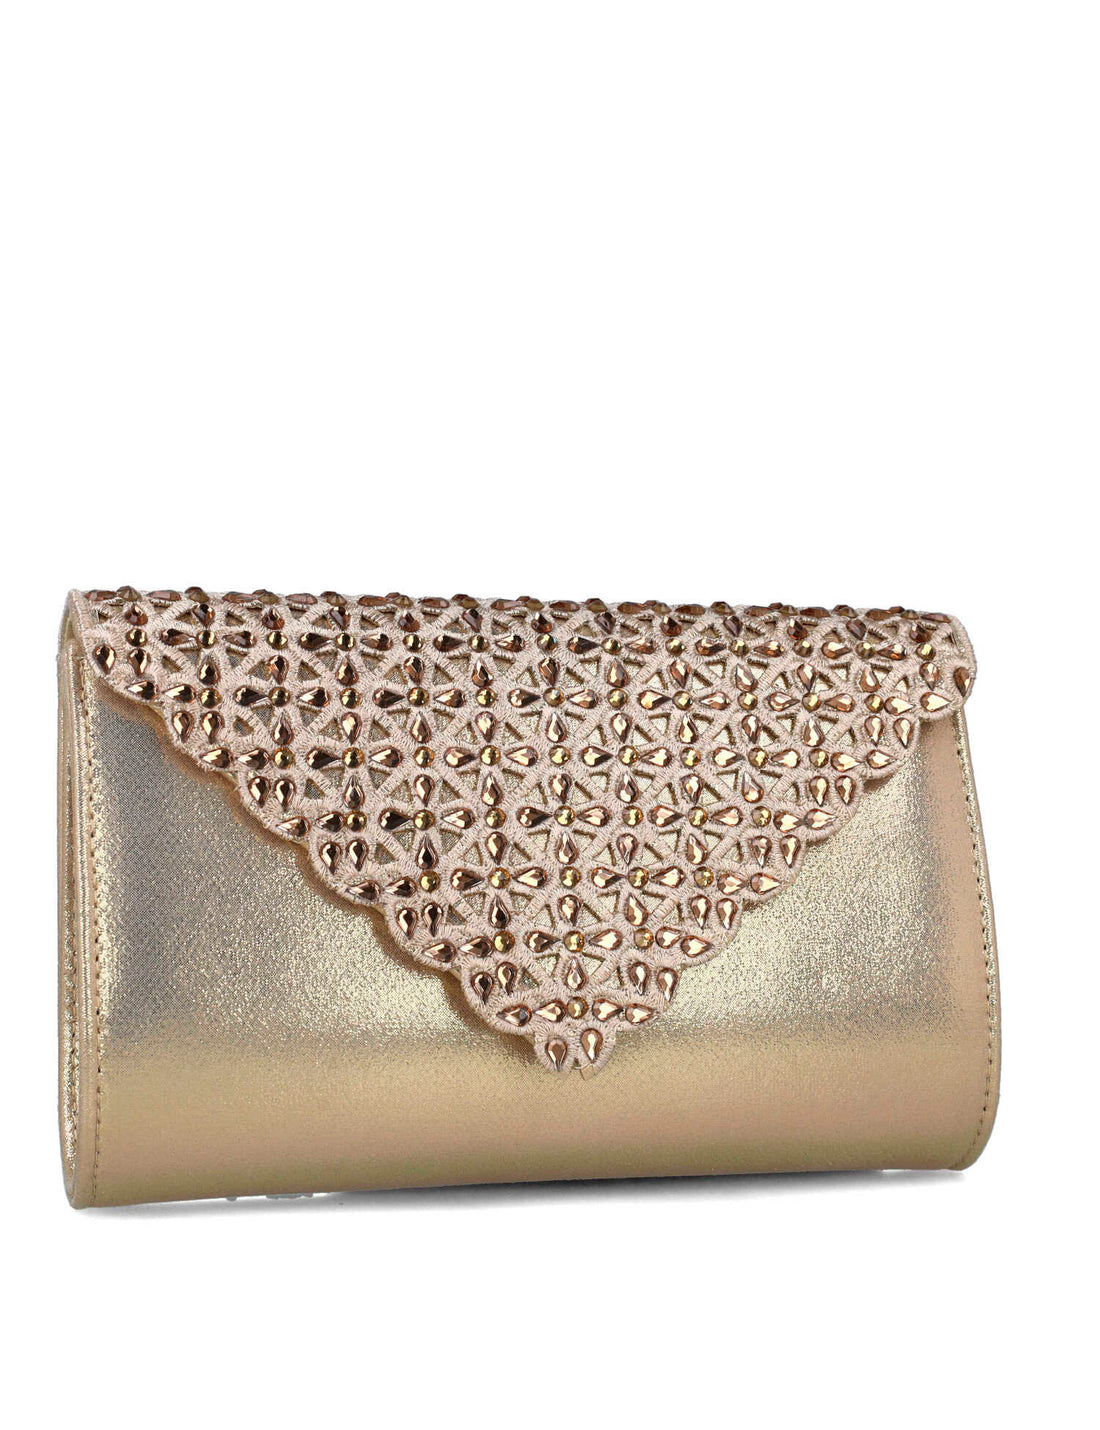 Gold Clutch With Embellished Flap_85540_00_02